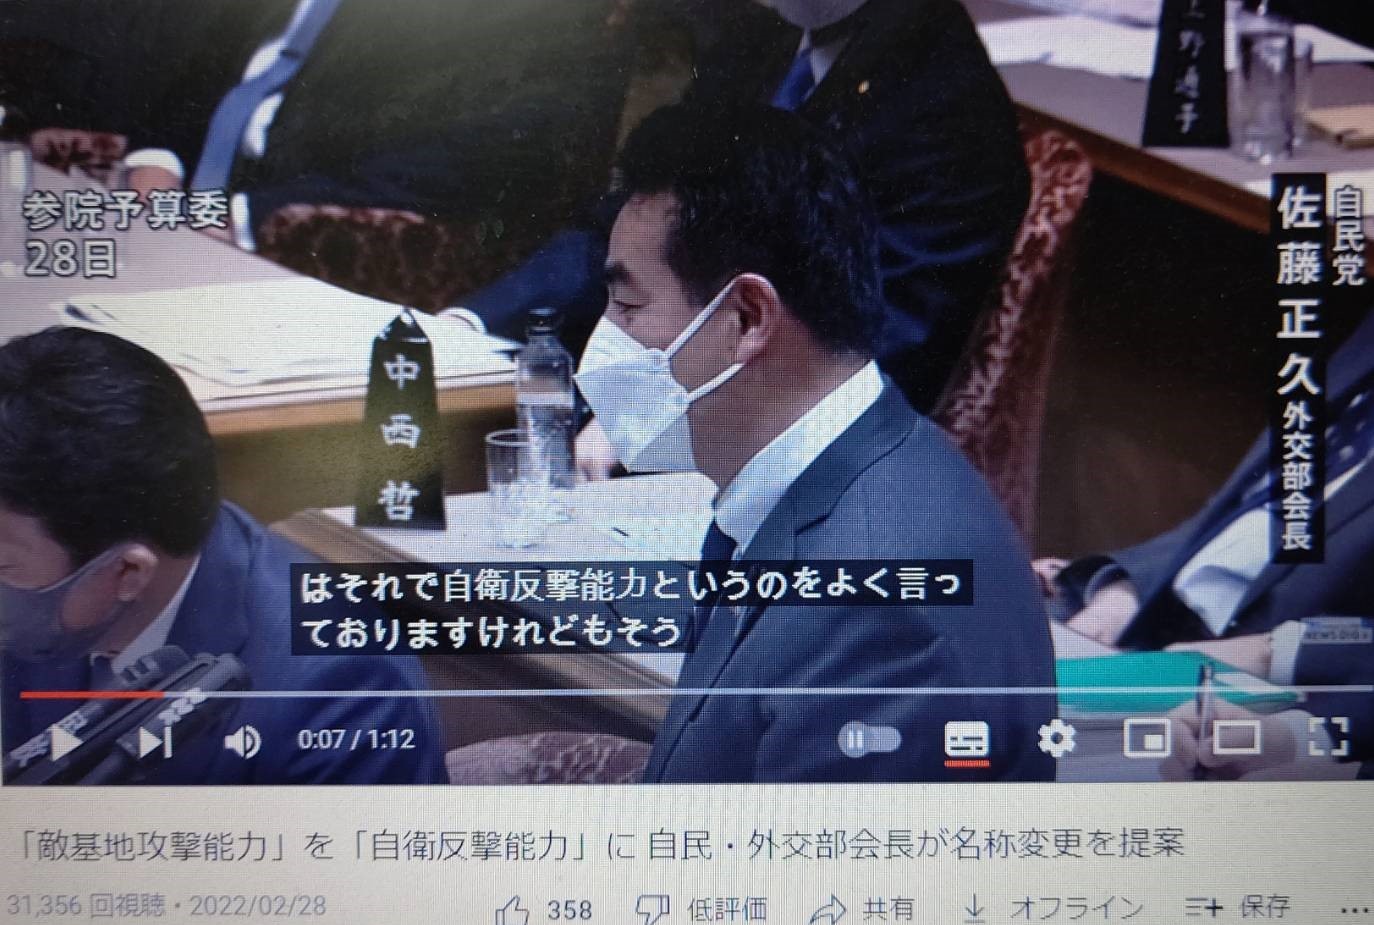 LDP Foreign Affairs Committee Chairman Sato proposed to Prime Minister Kishida that the “enemy base attack capability” being considered by the
        government be renamed “self-defense counterattack capability.” (2022/02/28 TBS NEWS, DIG Powered by JNN, From YouTube)